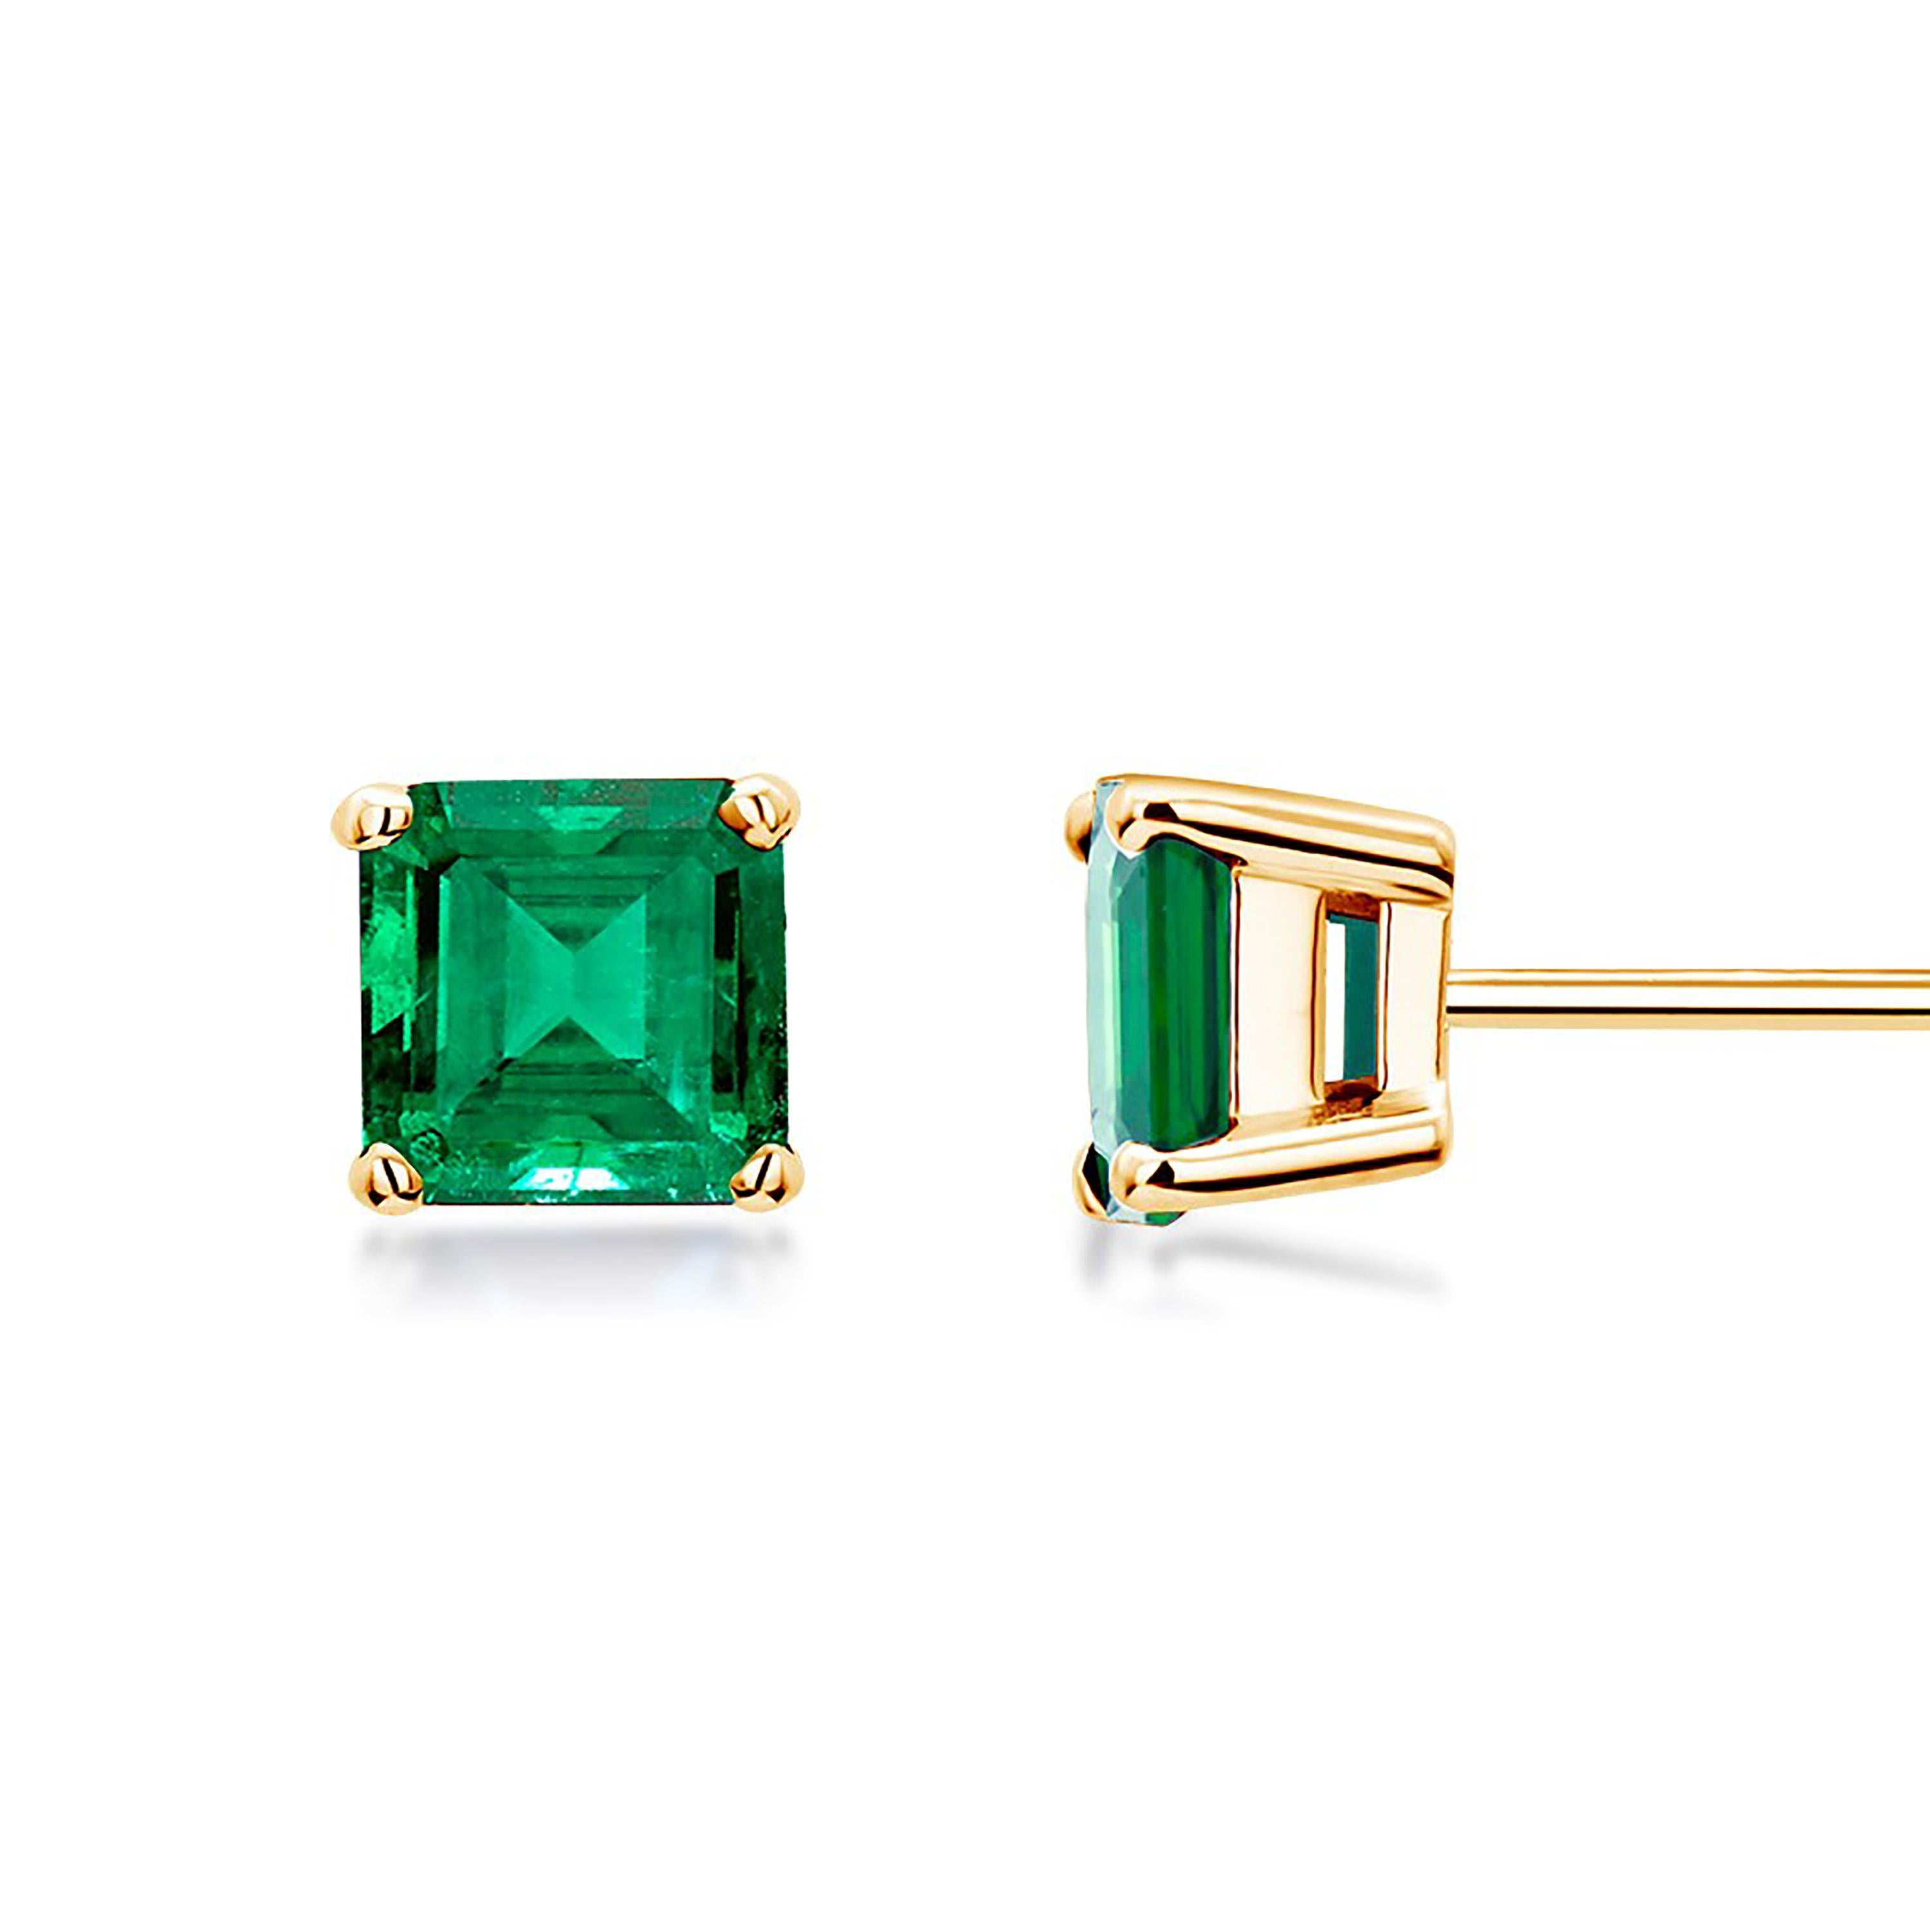 14 karats yellow gold 6-millimeter Colombia emerald stud earrings 
Emerald-Cut Emeralds weighing 1.10 carats
Width of the earrings six millimeter 
New Earrings
Handmade in the USA
The 14 karat gold earrings are hanging off a post with push-backs
Our